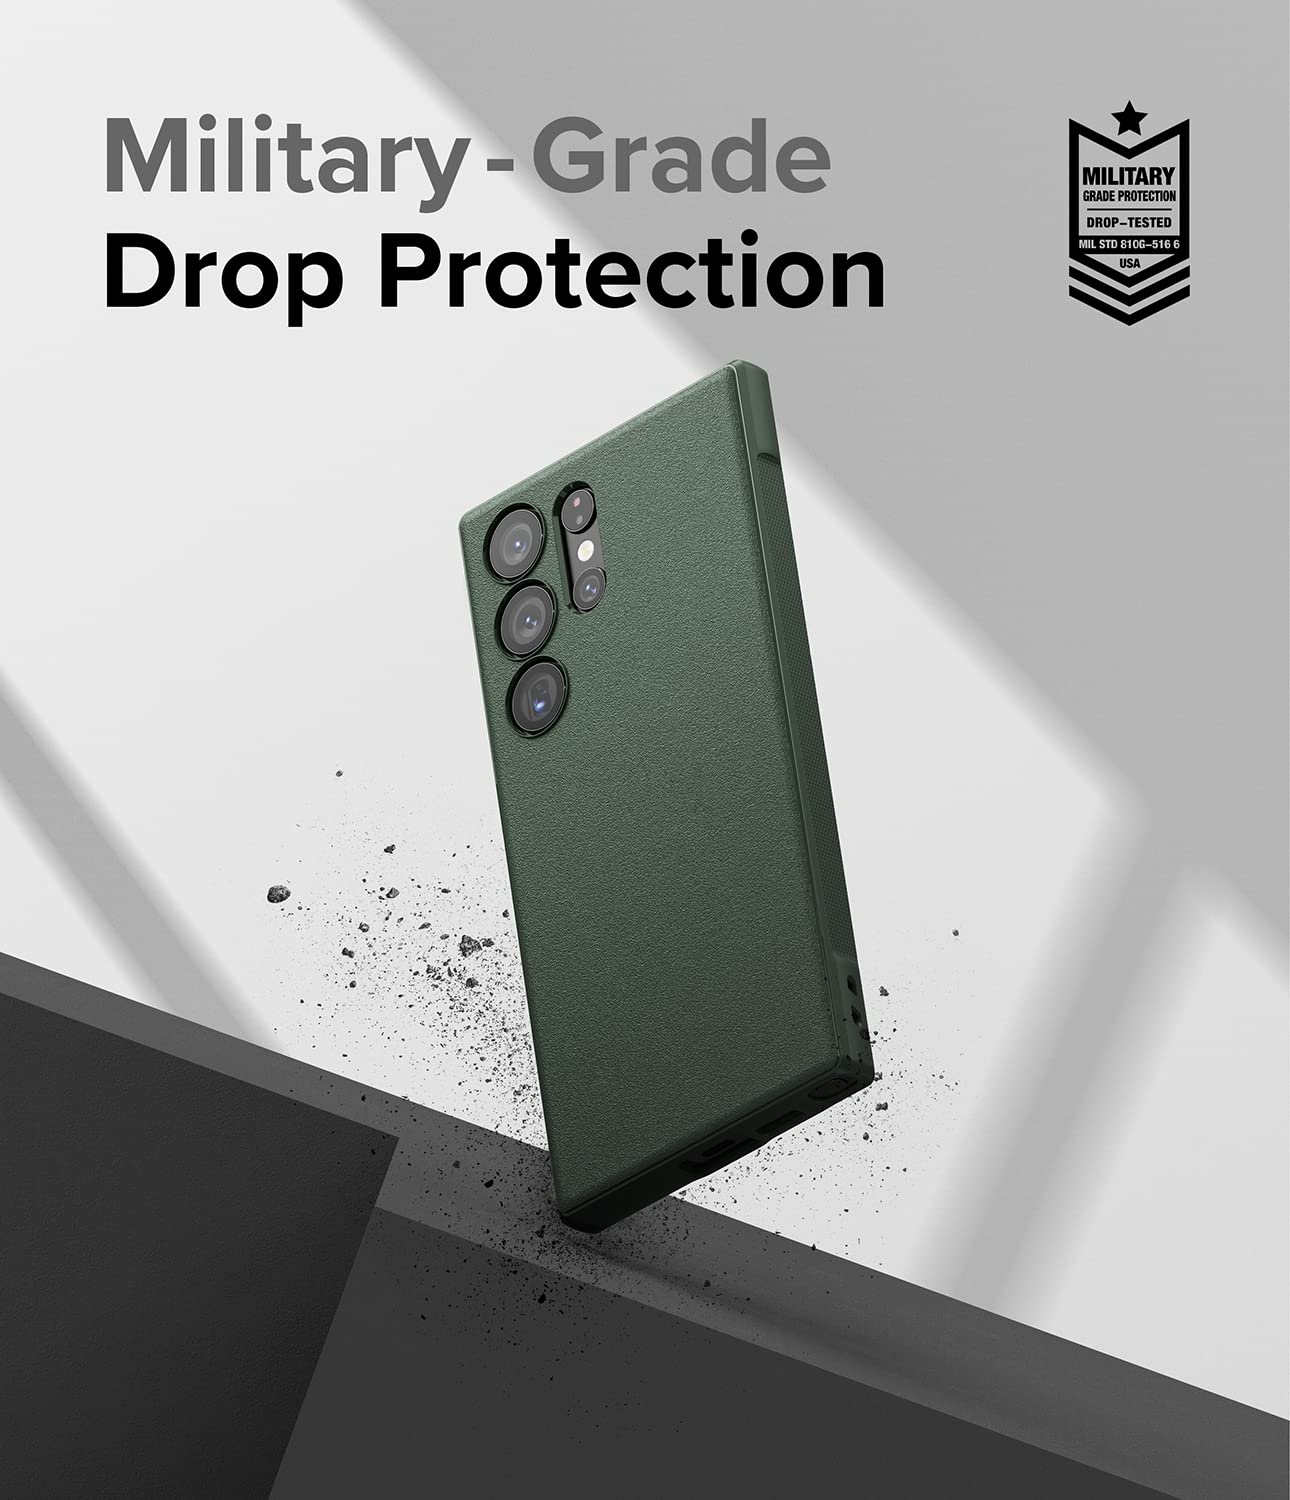 Ringke Onyx [Feels Good in The Hand] Compatible with Samsung Galaxy S23 Ultra Case 5G, Anti-Fingerprint Technology Non-Slip Enhanced Grip Smudge Proof Cover Designed for S23 Ultra Case - Dark Green